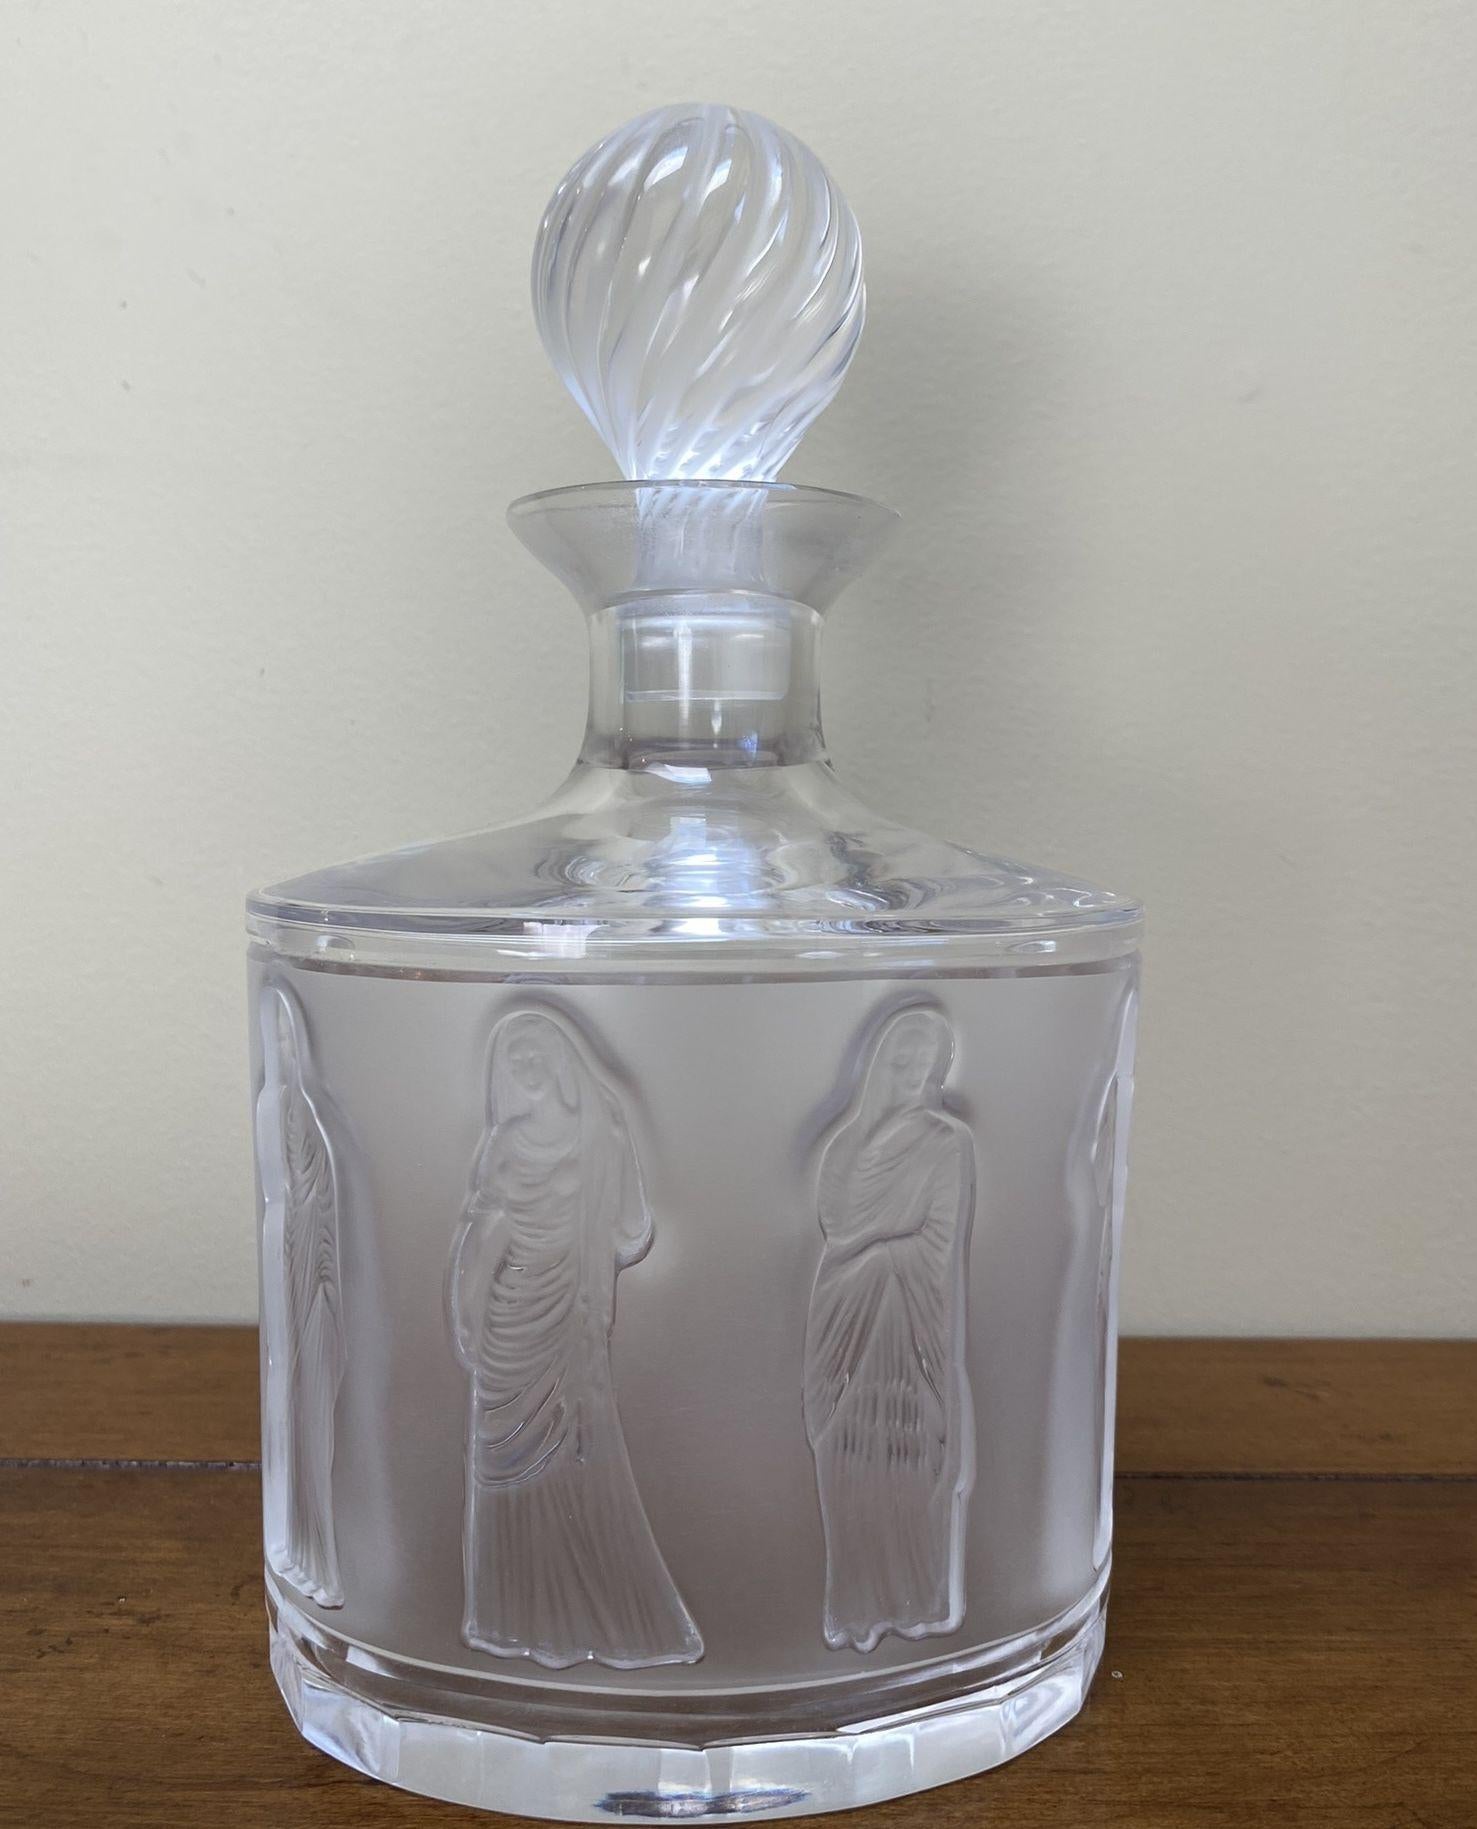 Simply Beautiful! Lalique France Antique Women Crystal Whisky Decanter. Featuring Women dressed in Togas autour folded into the crystal surface. Measuring approx. 9. 5” x 5.5” MARKINGS: signed on flat-cut base, Lalique France. 32.12 oz. Volume;